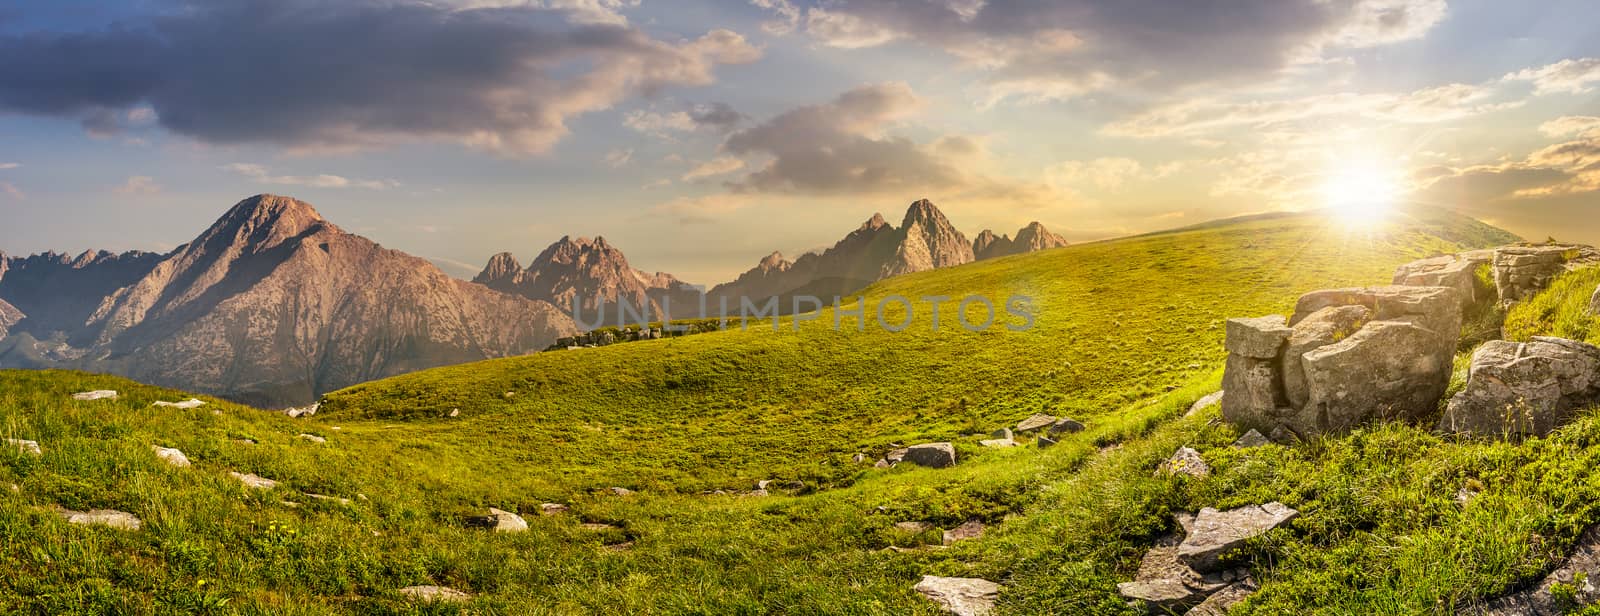 huge stones in valley on top of mountain range at sunset by Pellinni